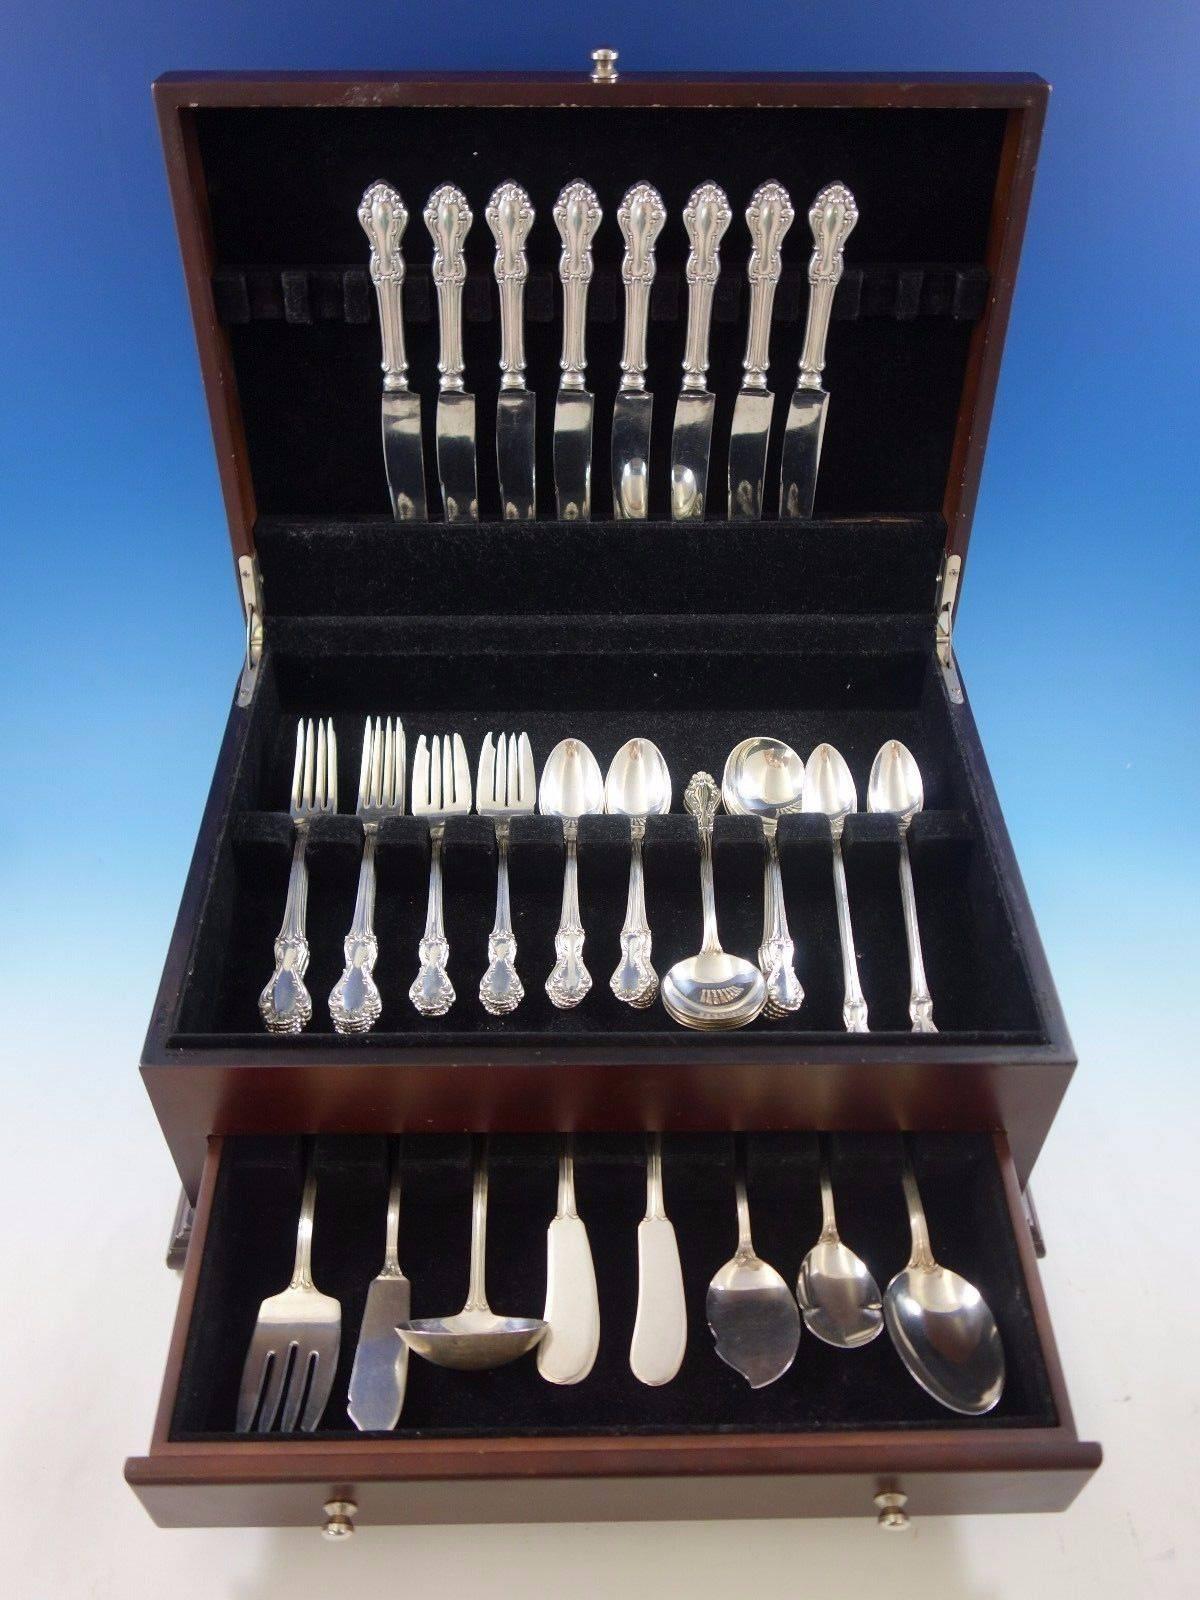 Princess Elizabeth by National Sterling silver flatware set, 62 pieces. This set includes: 

Eight knives, 8 3/4